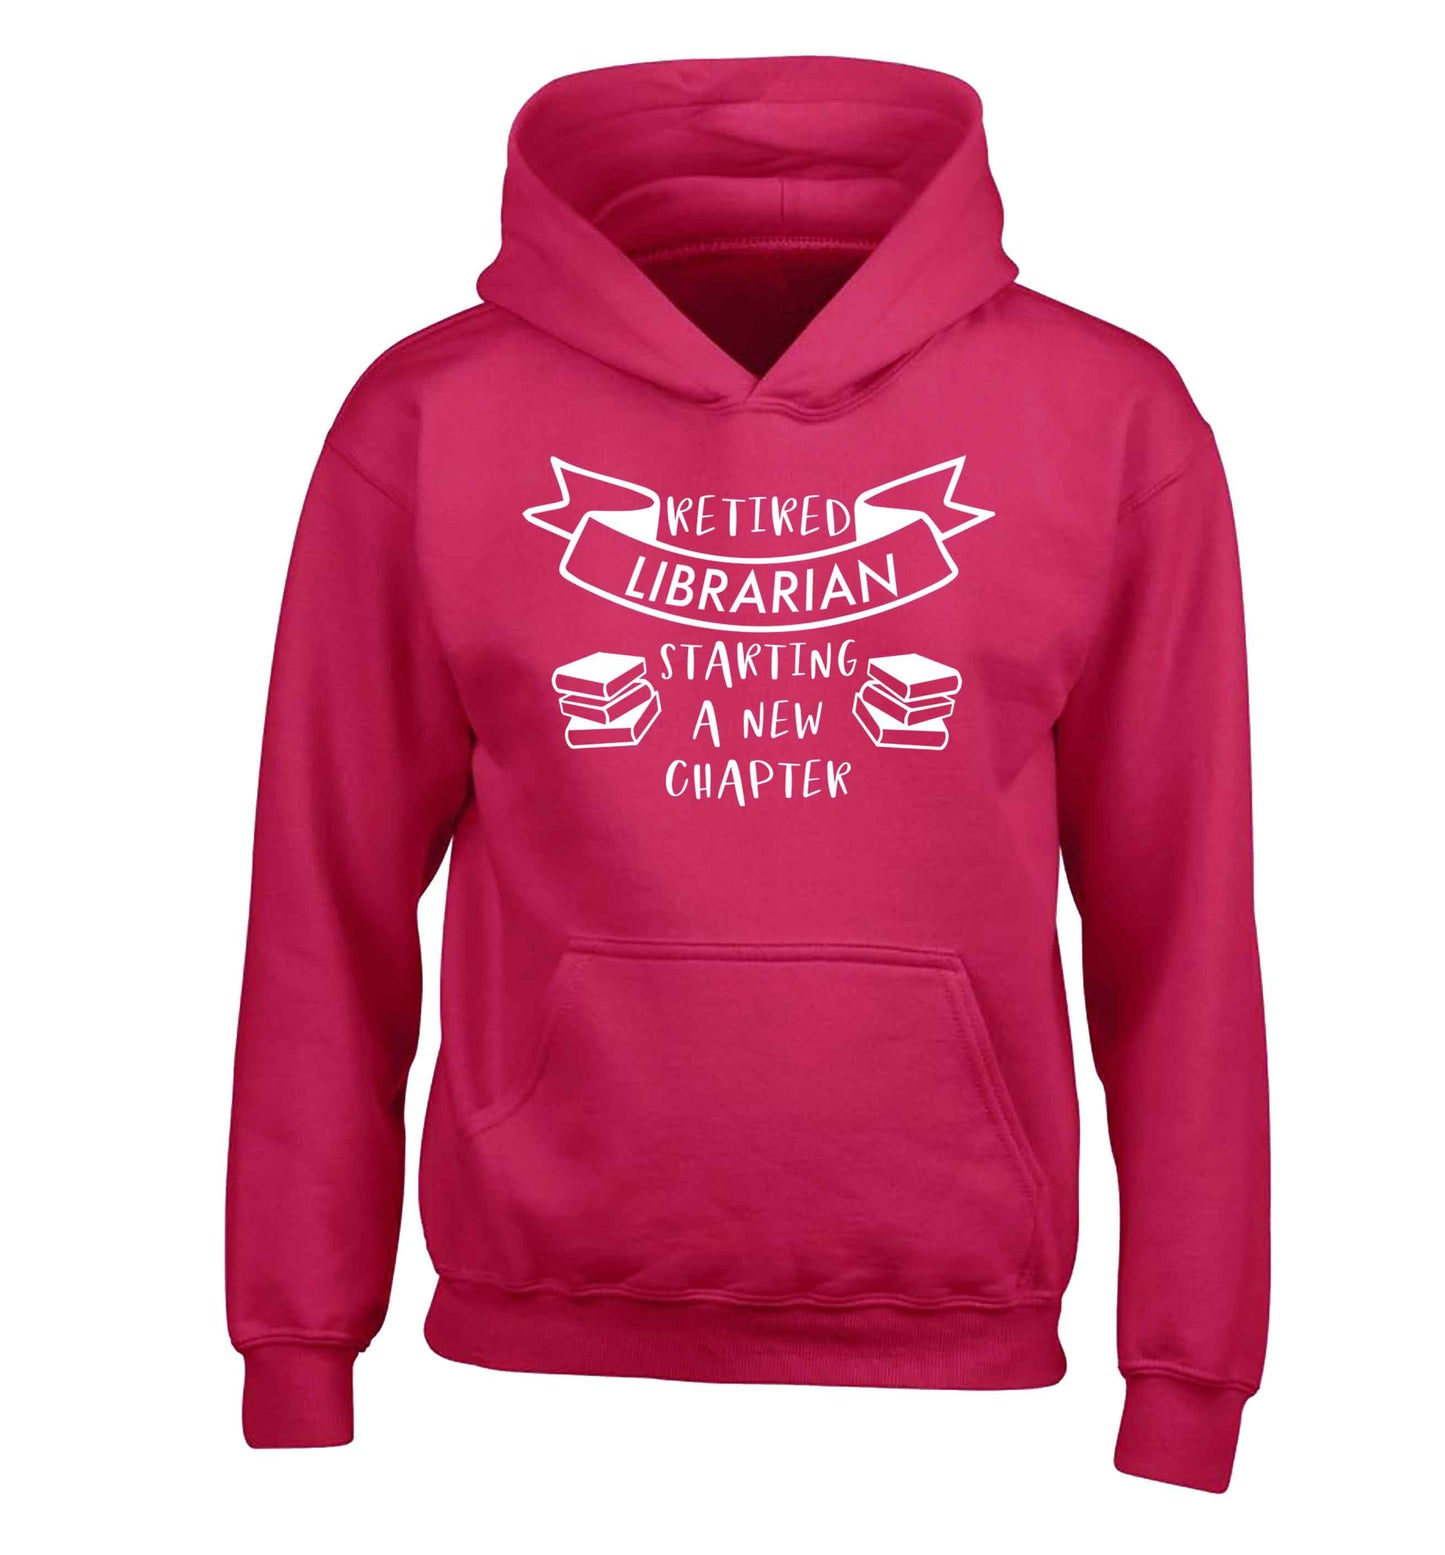 Retired librarian keep your hair on children's pink hoodie 12-13 Years